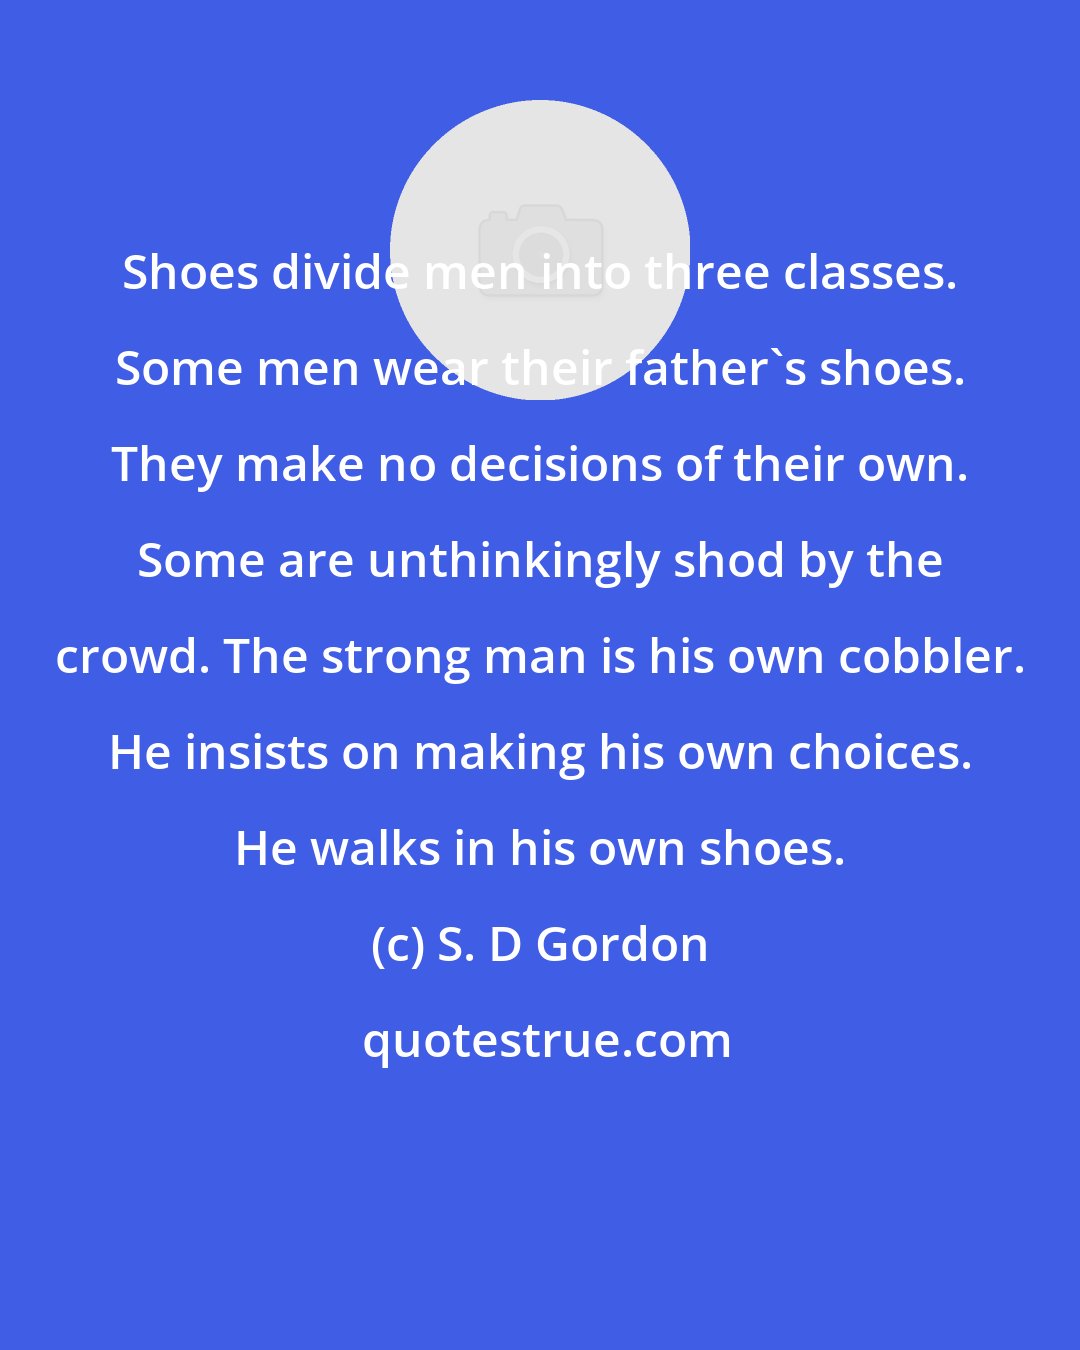 S. D Gordon: Shoes divide men into three classes. Some men wear their father's shoes. They make no decisions of their own. Some are unthinkingly shod by the crowd. The strong man is his own cobbler. He insists on making his own choices. He walks in his own shoes.